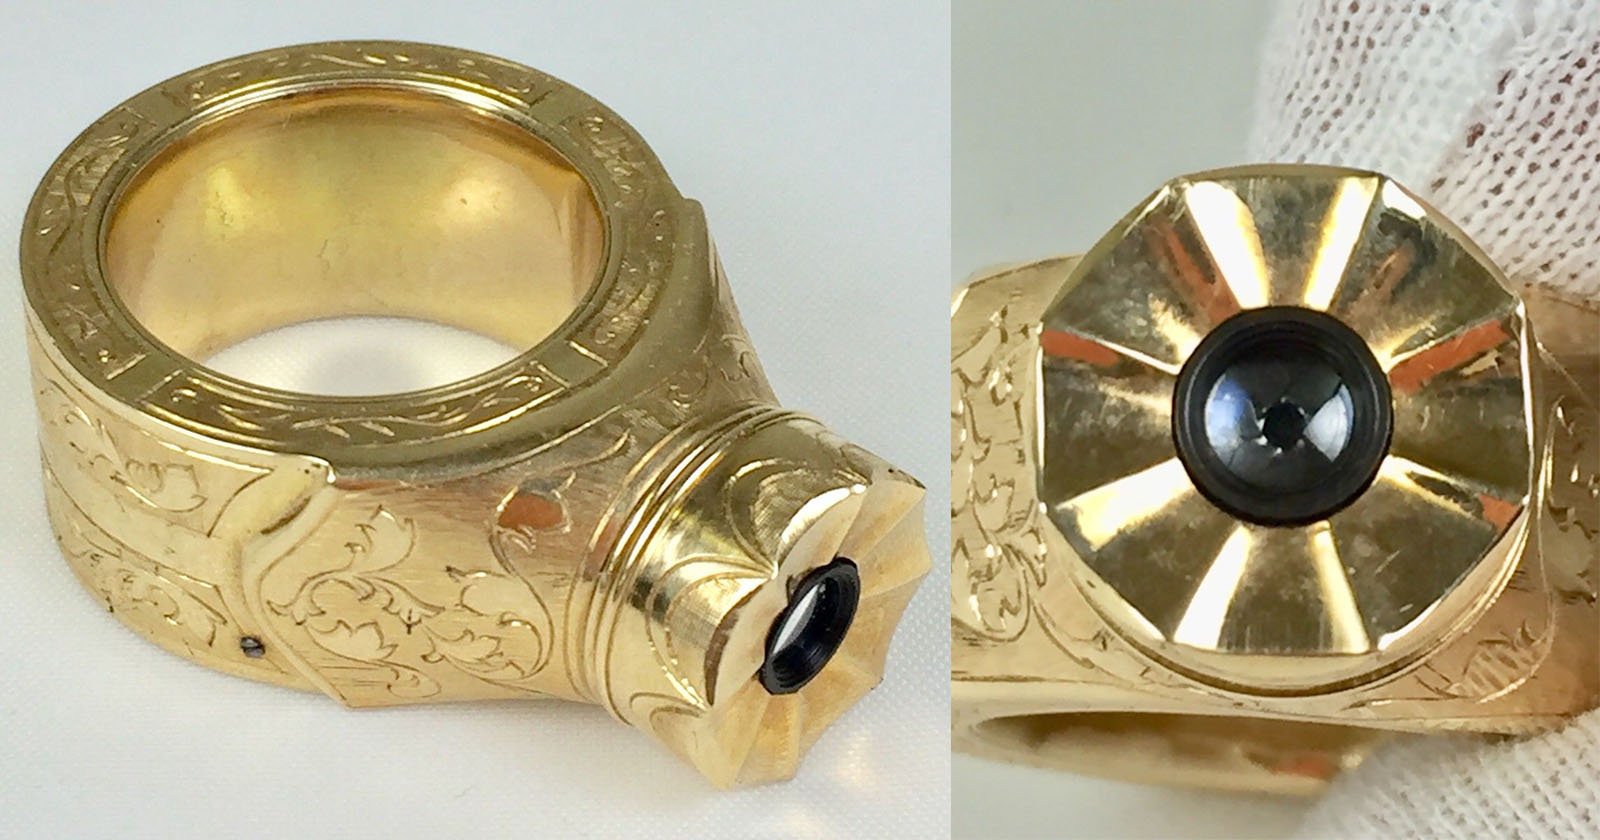 This Unusual Gold Ring Is A Rare Soviet Spy Camera Worth 20 000